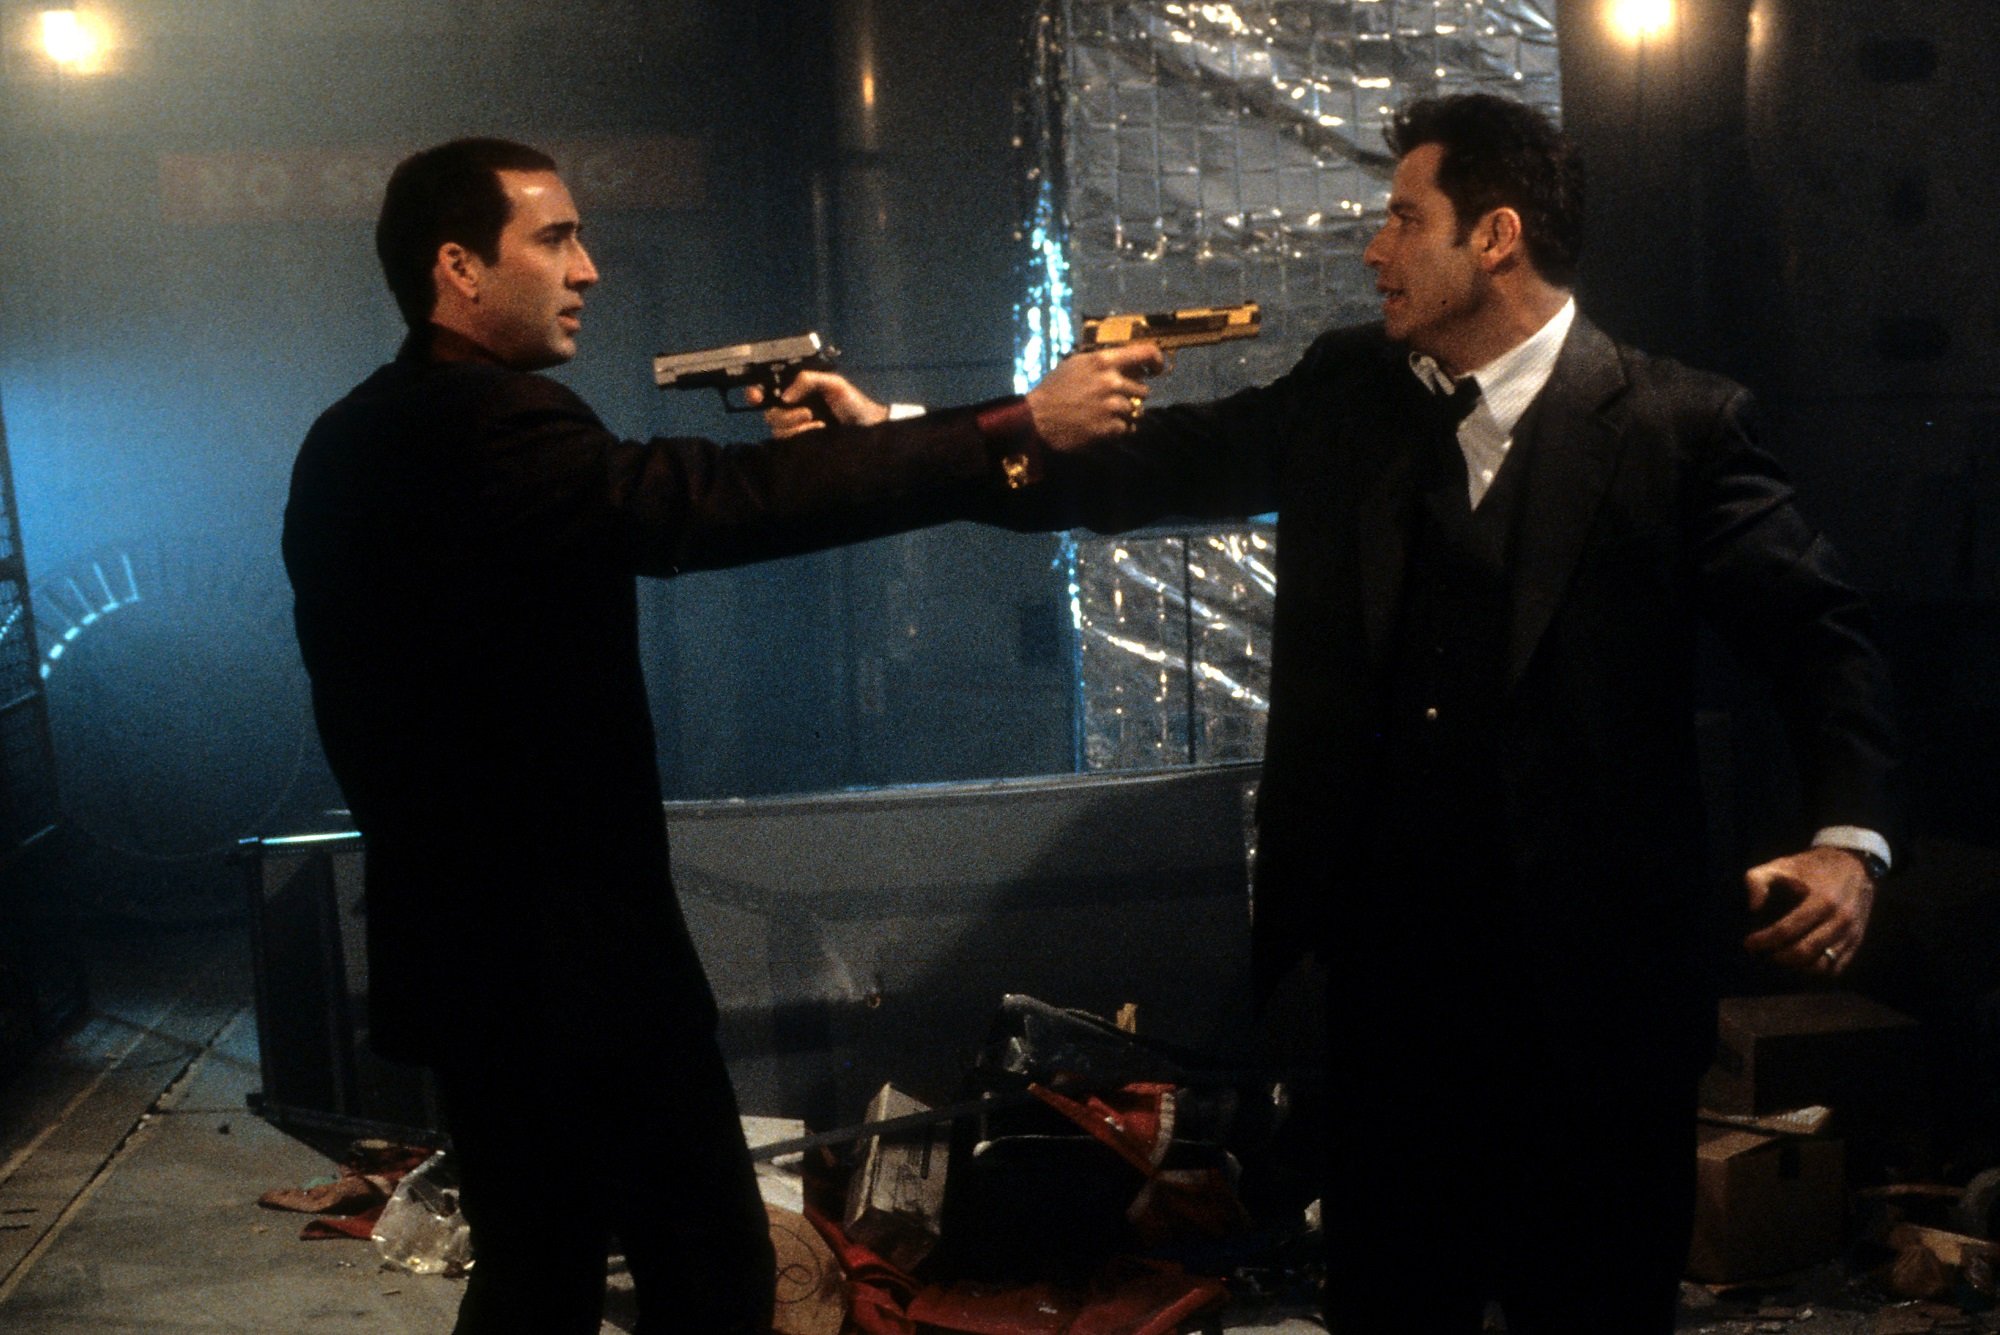 Face/Off stars Nicolas Cage and John Travolta point guns at each other